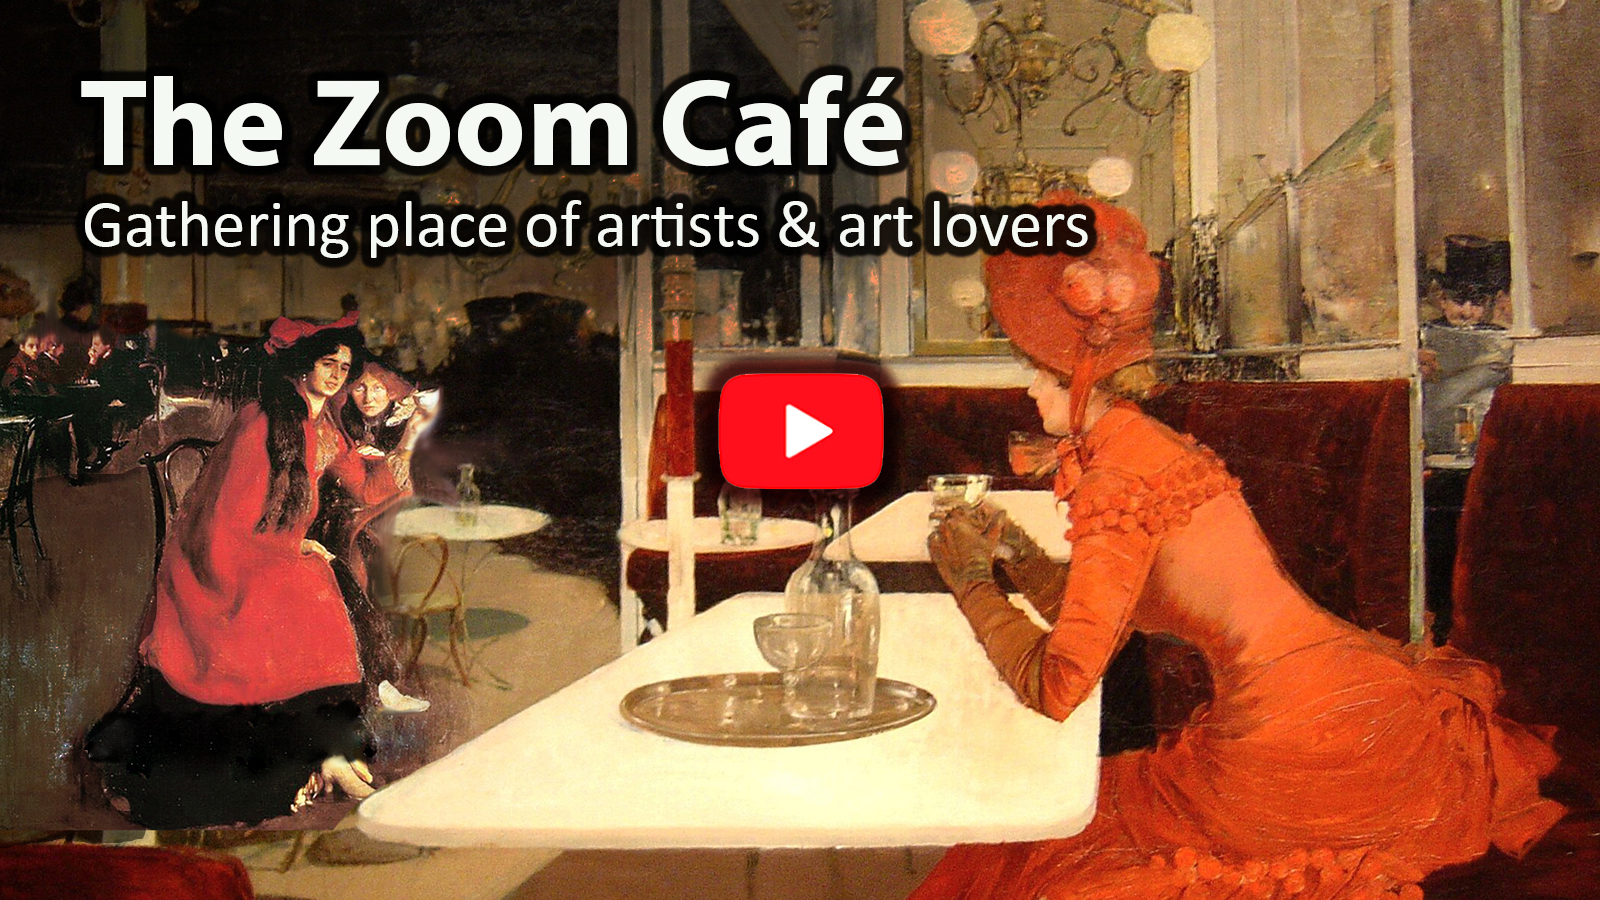 The Zoom Cafe